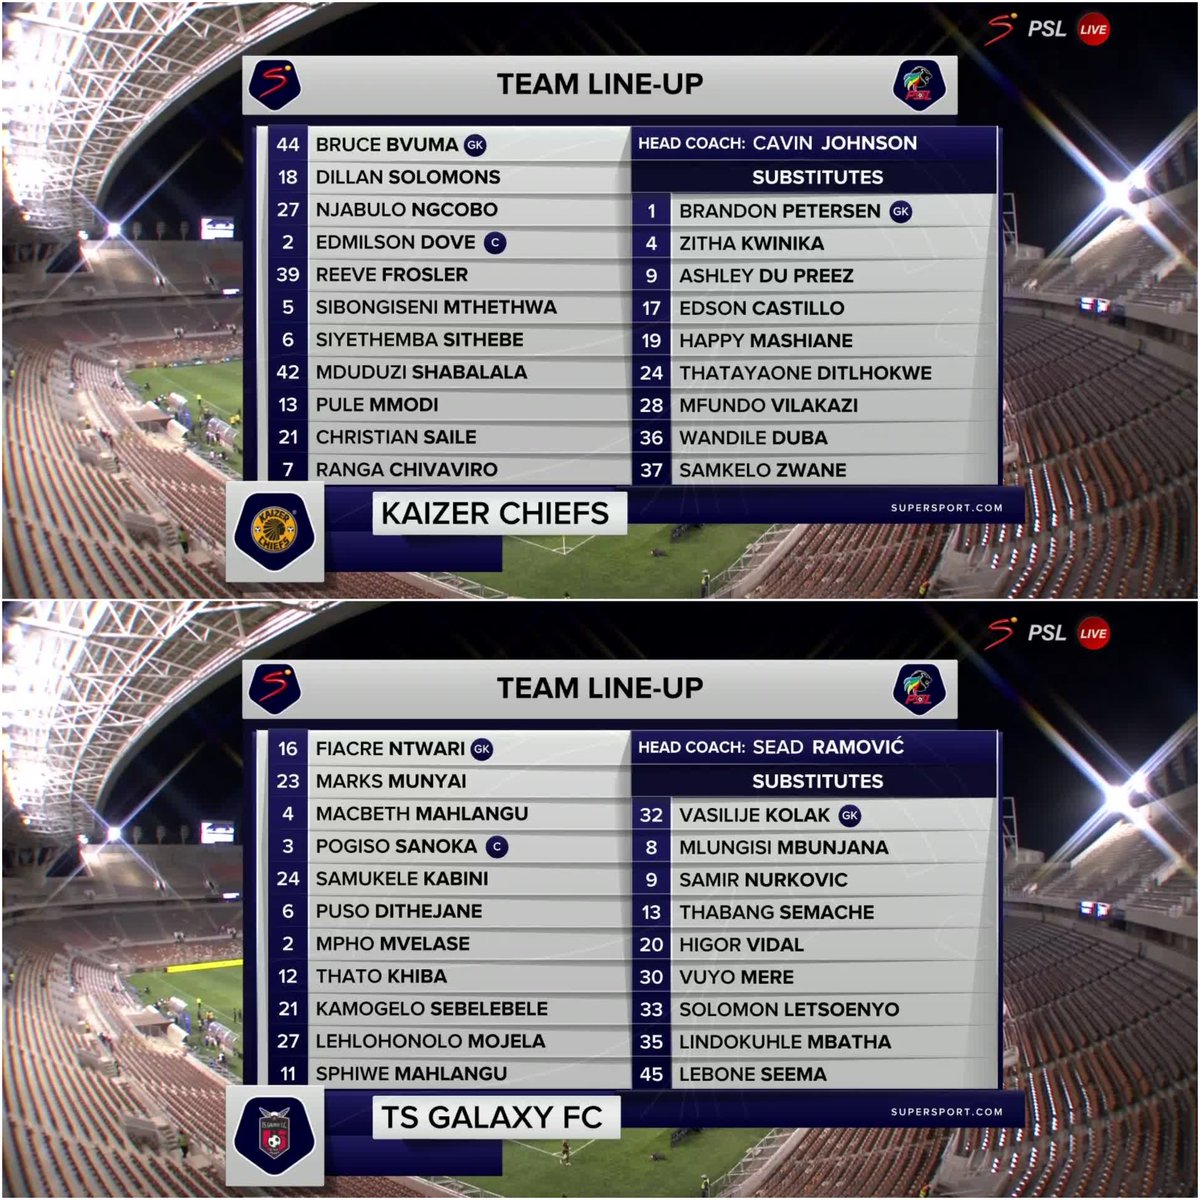 TS Galaxy are looking to do a #DStvPrem double on Chiefs for the first time 👀 Here are the line-ups 👇 📺 Stream #DStvPrem live: tinyurl.com/4wrtdwtb